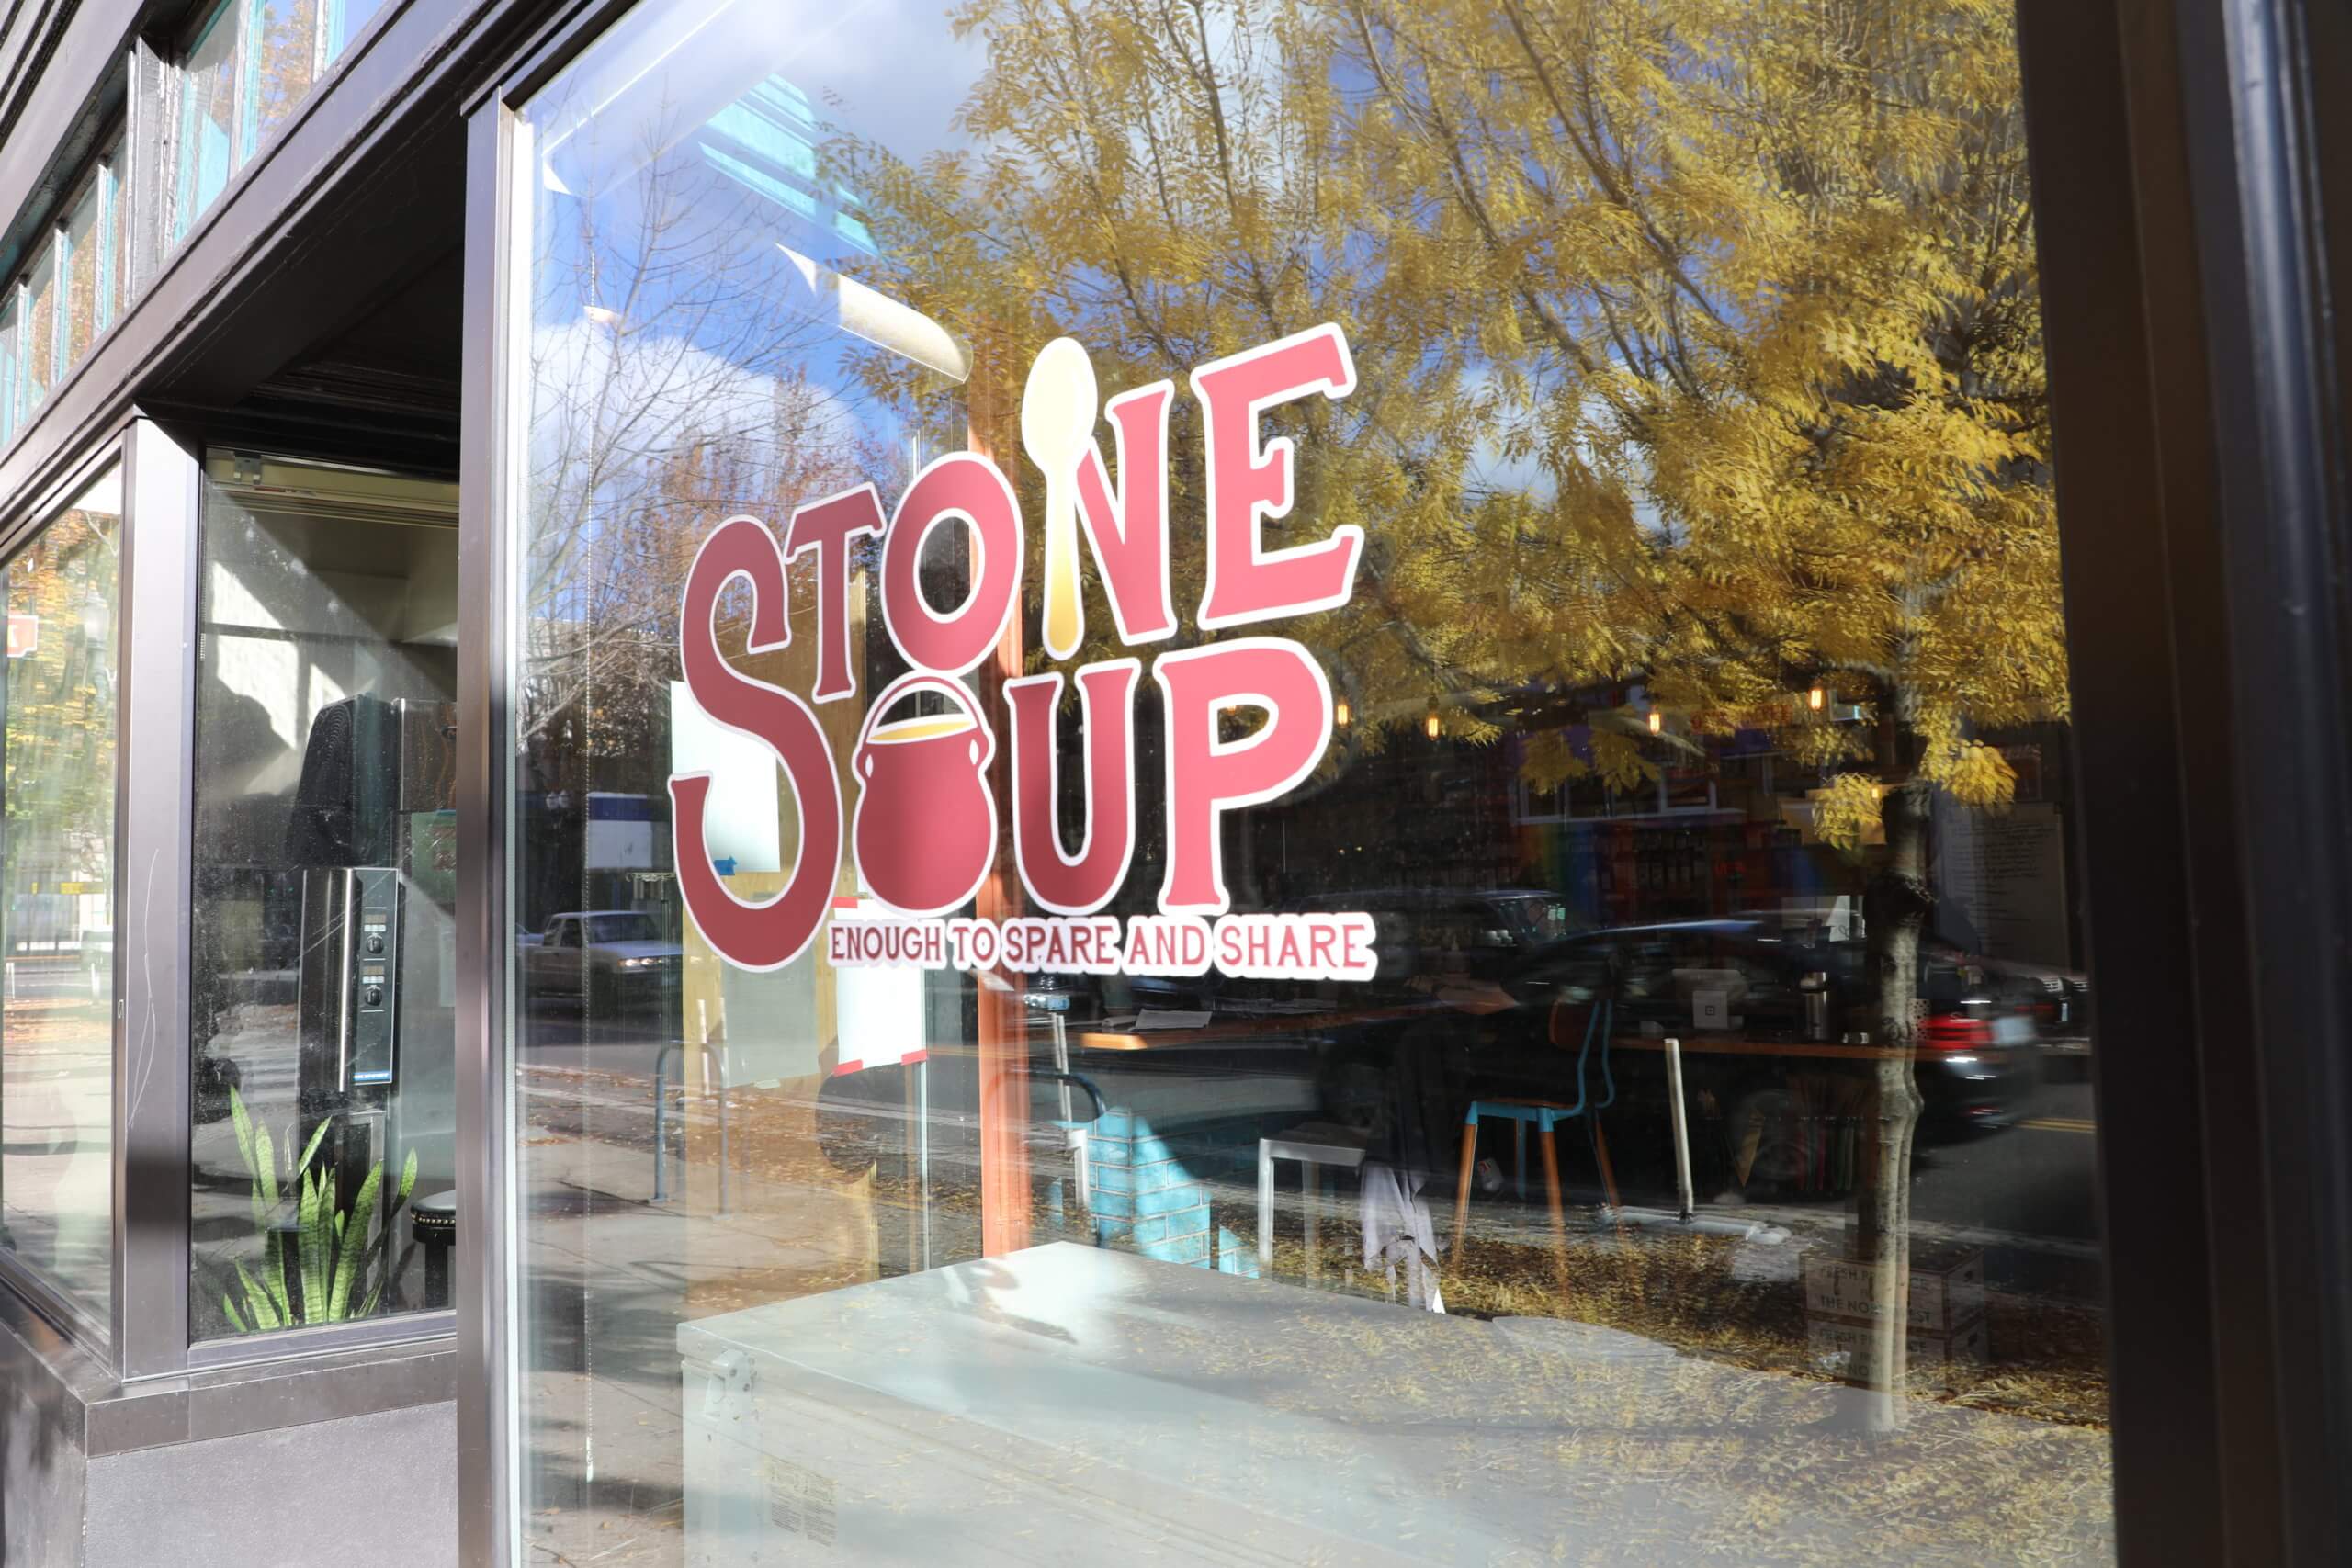 Stone Soup sign